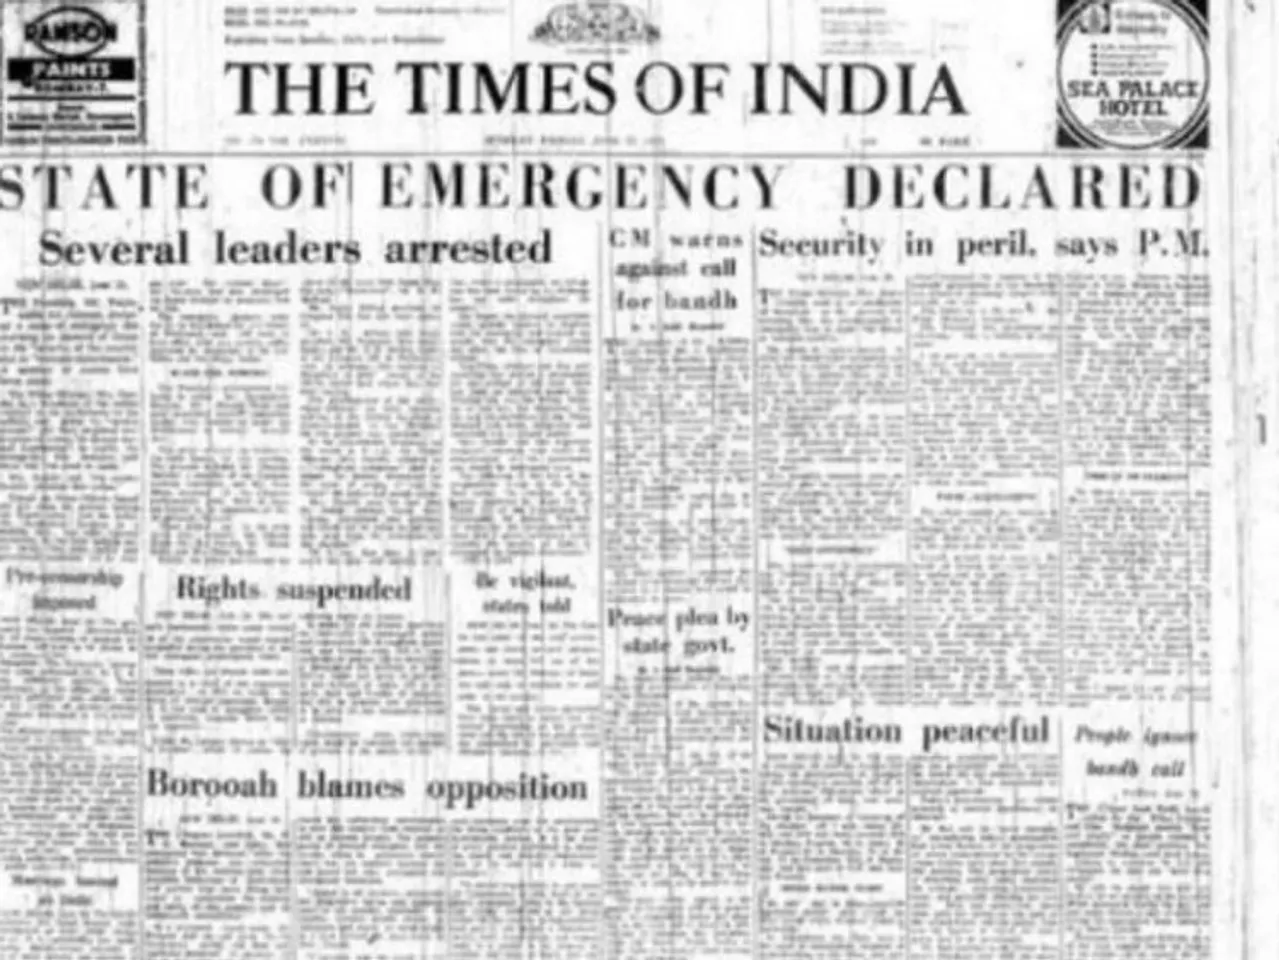 1975 Times of India front page